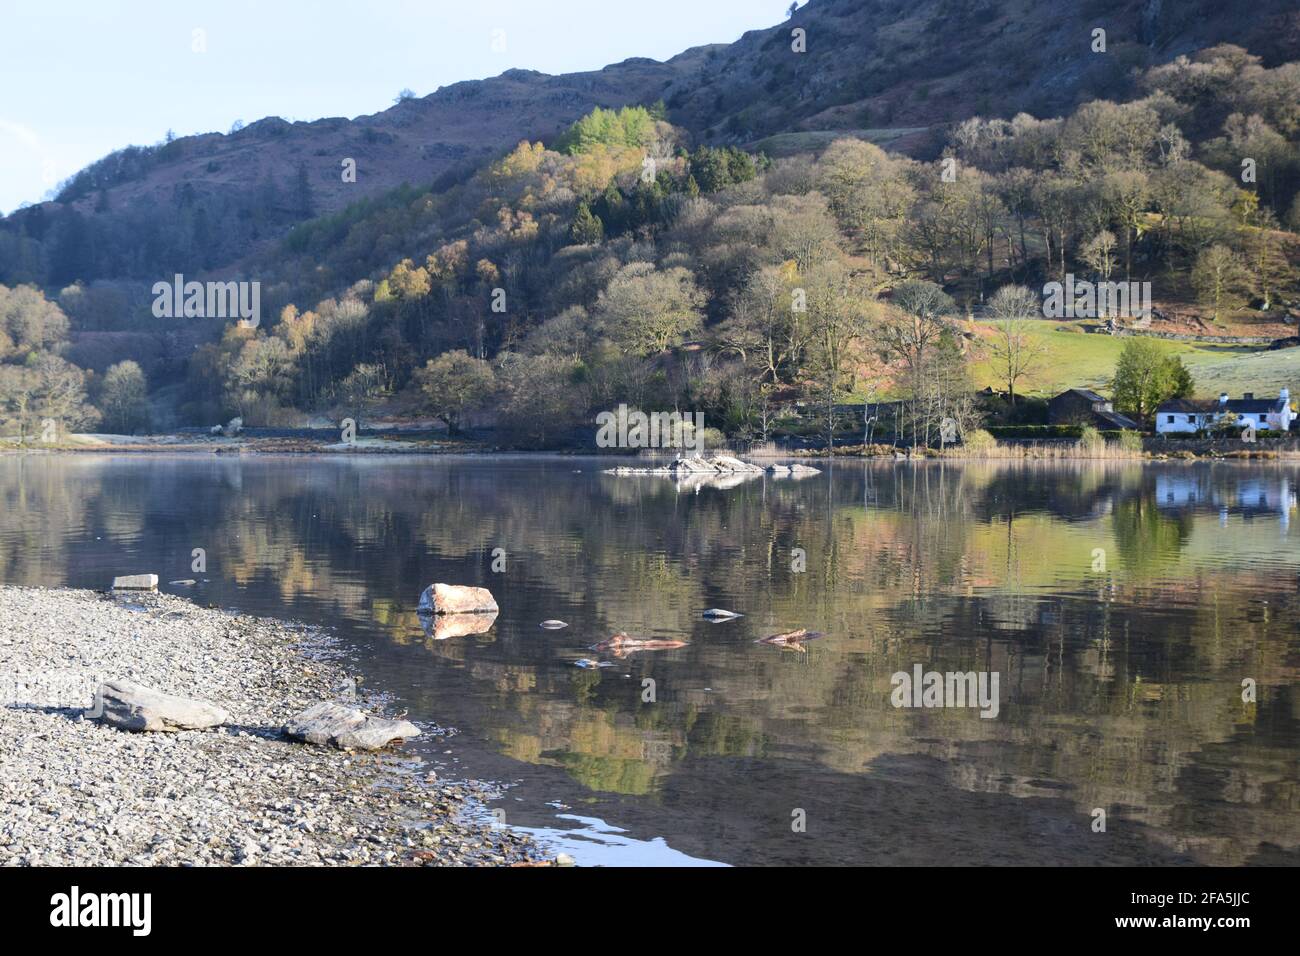 A lovely tranquil early morning scene at Rydal water with the surrounding hills tumbling down to the lake with beautiful reflections on its surface. Stock Photo